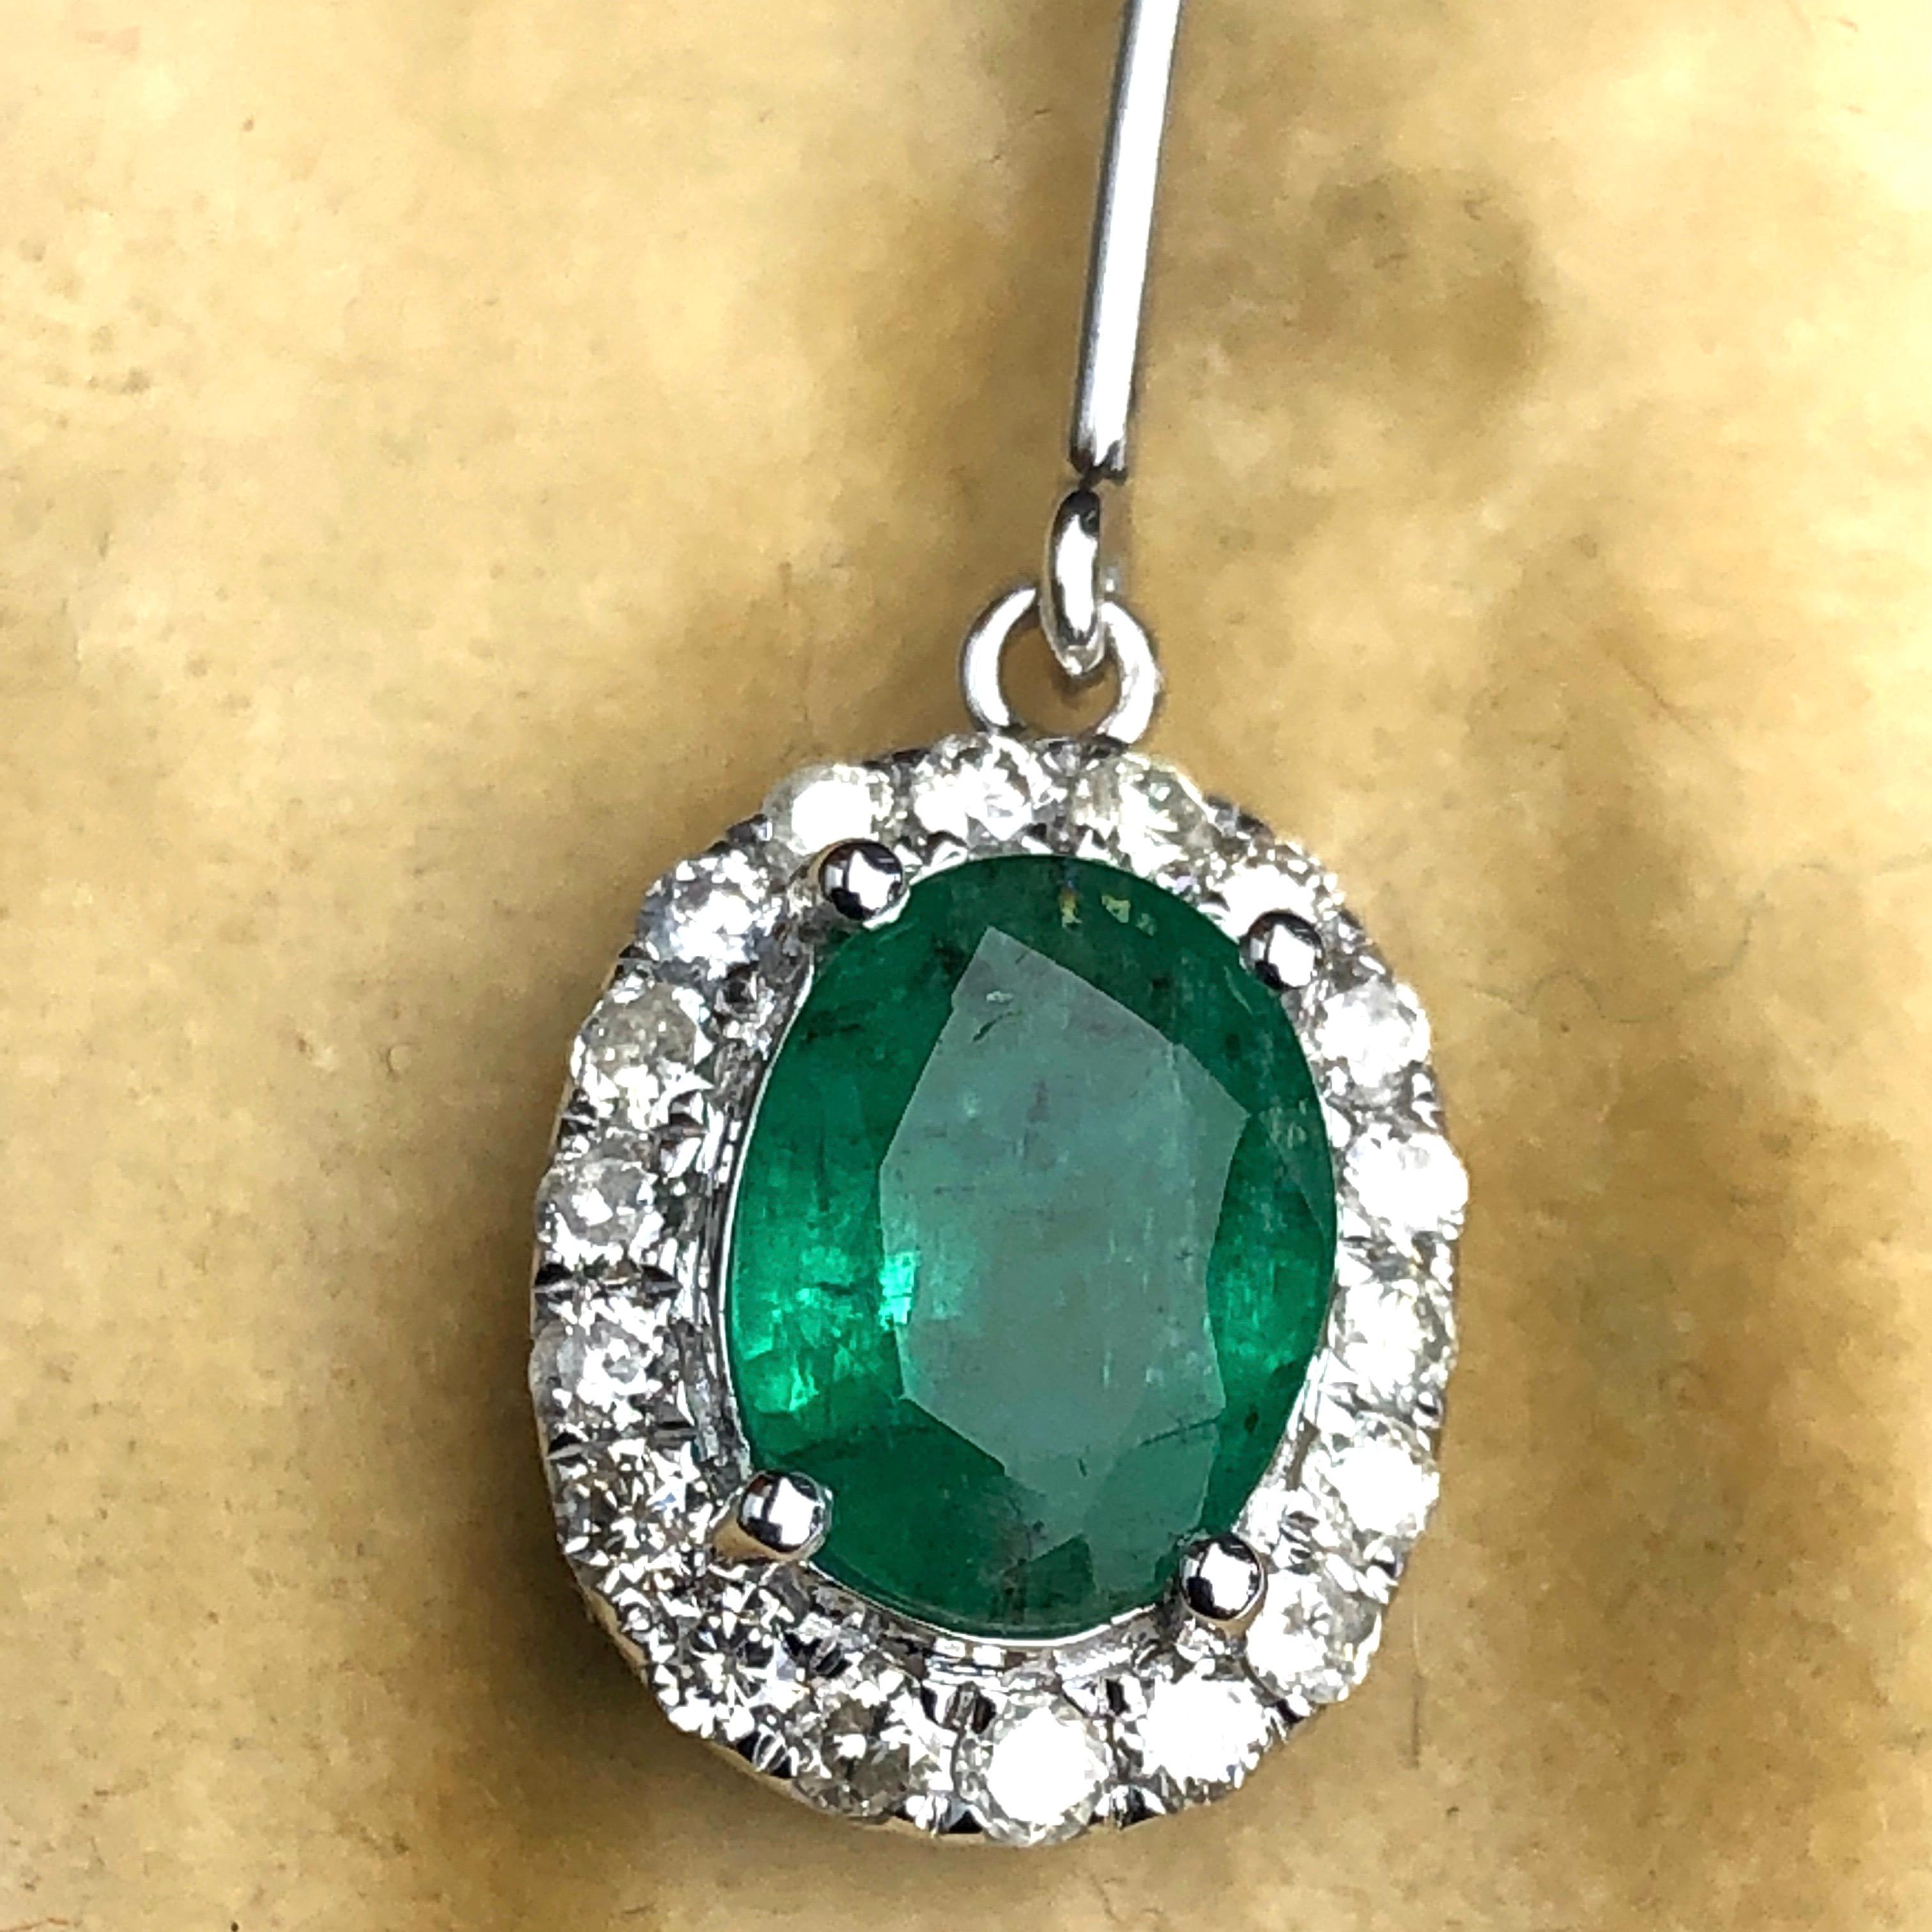 The emeralds at the centre of these fabulous drop earrings are a bright green colour and are gorgeously complimented by a halo of bright sparkling diamonds. The emeralds measure 1.15ct each and the diamonds total 29pts each per earring.

Weight: